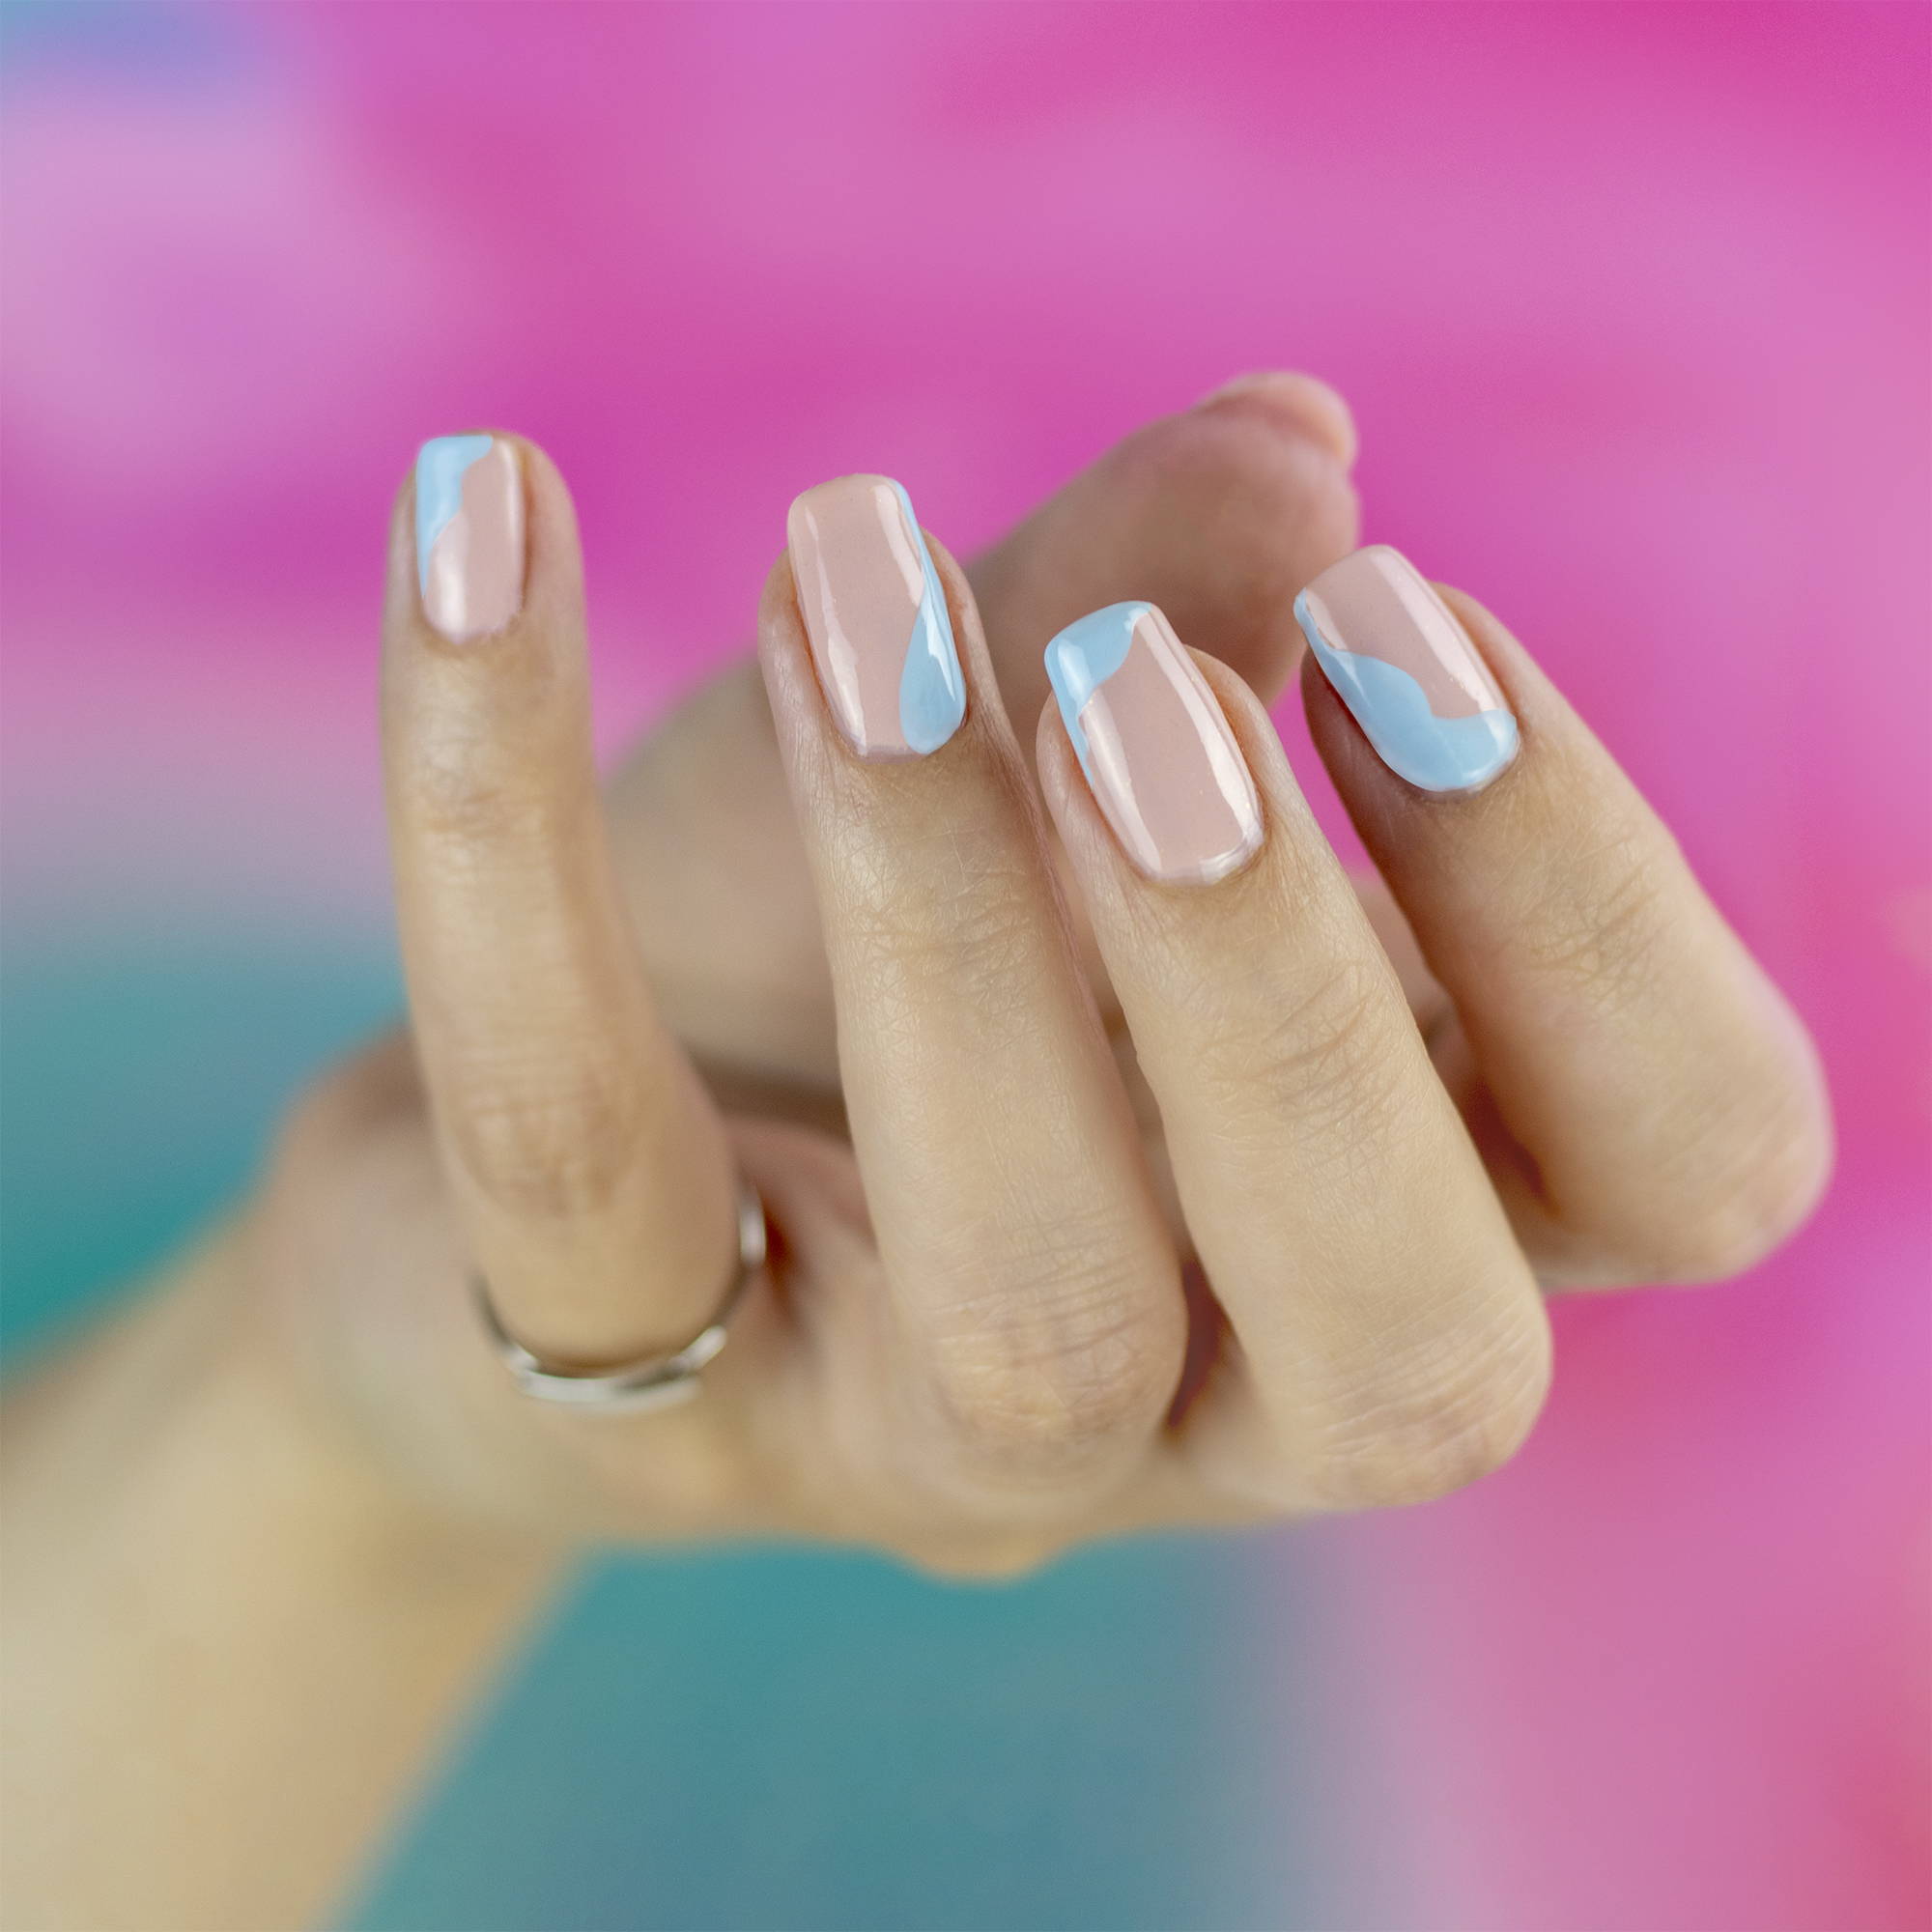 Pastel french manicure tips